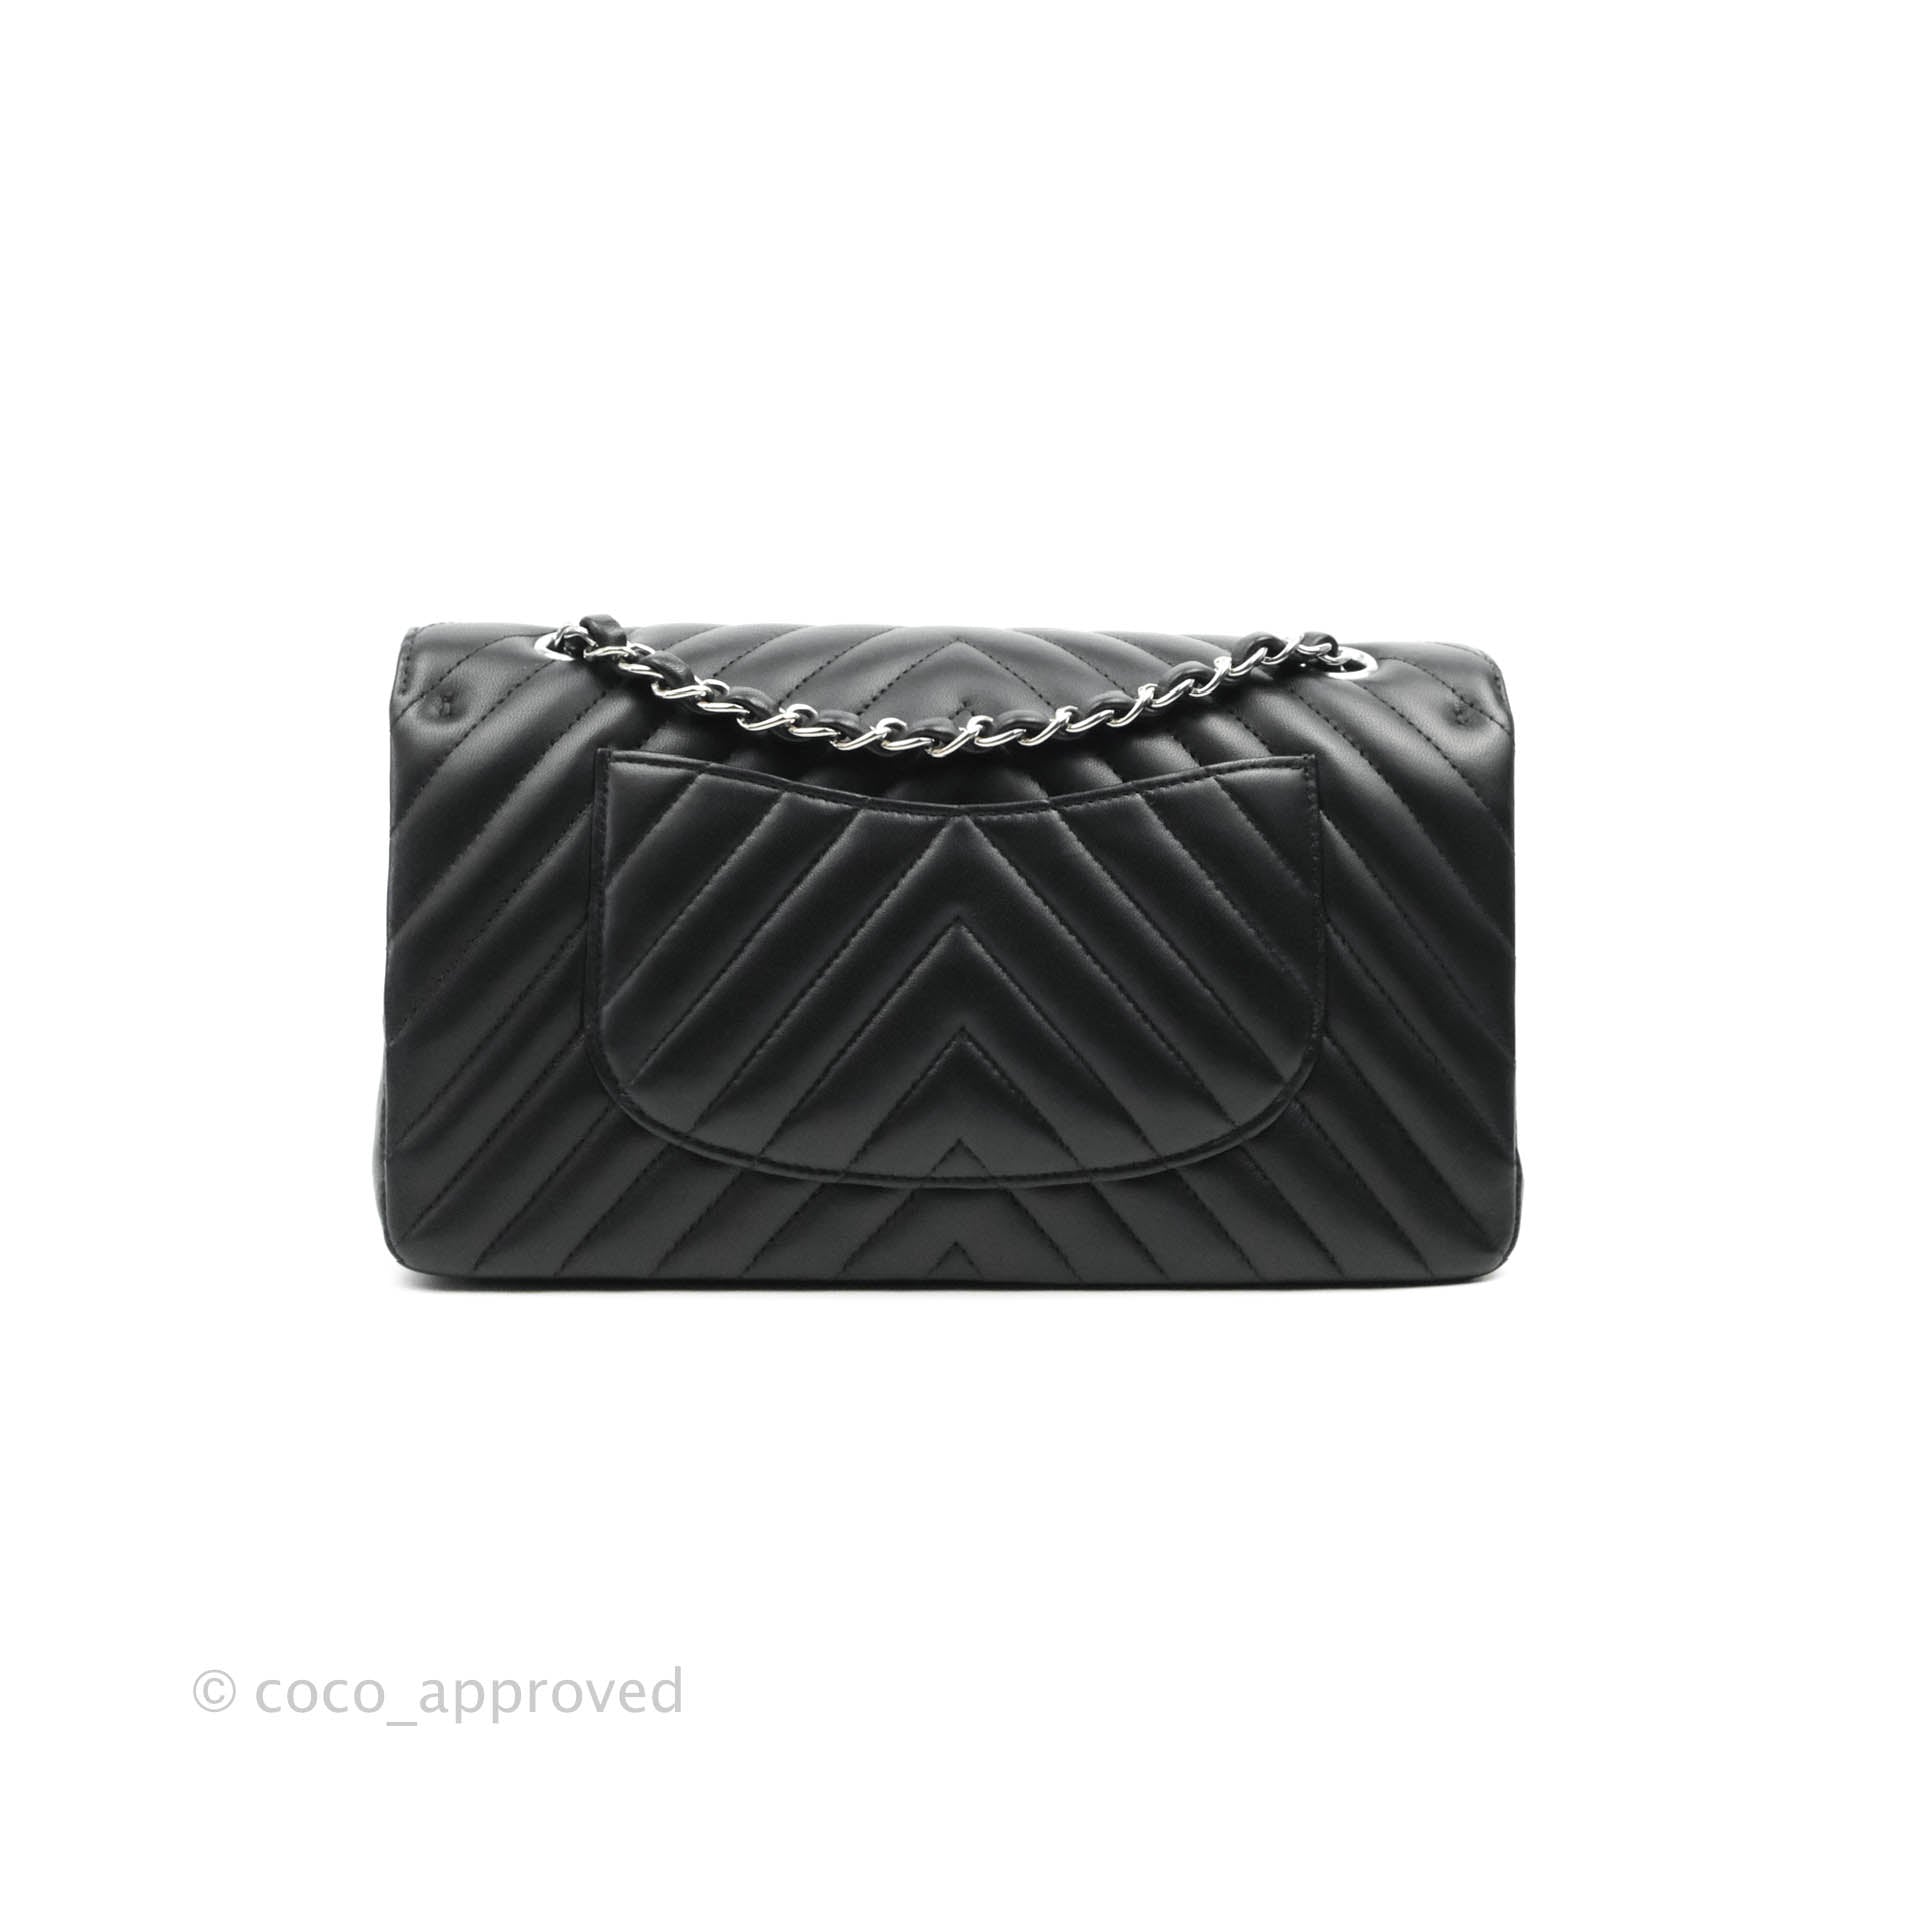 Chanel Chevron Flap Bag with Pyramid CC Clasp in Black Lambskin sale at USD  379. Free Shipping by courier to your addres…